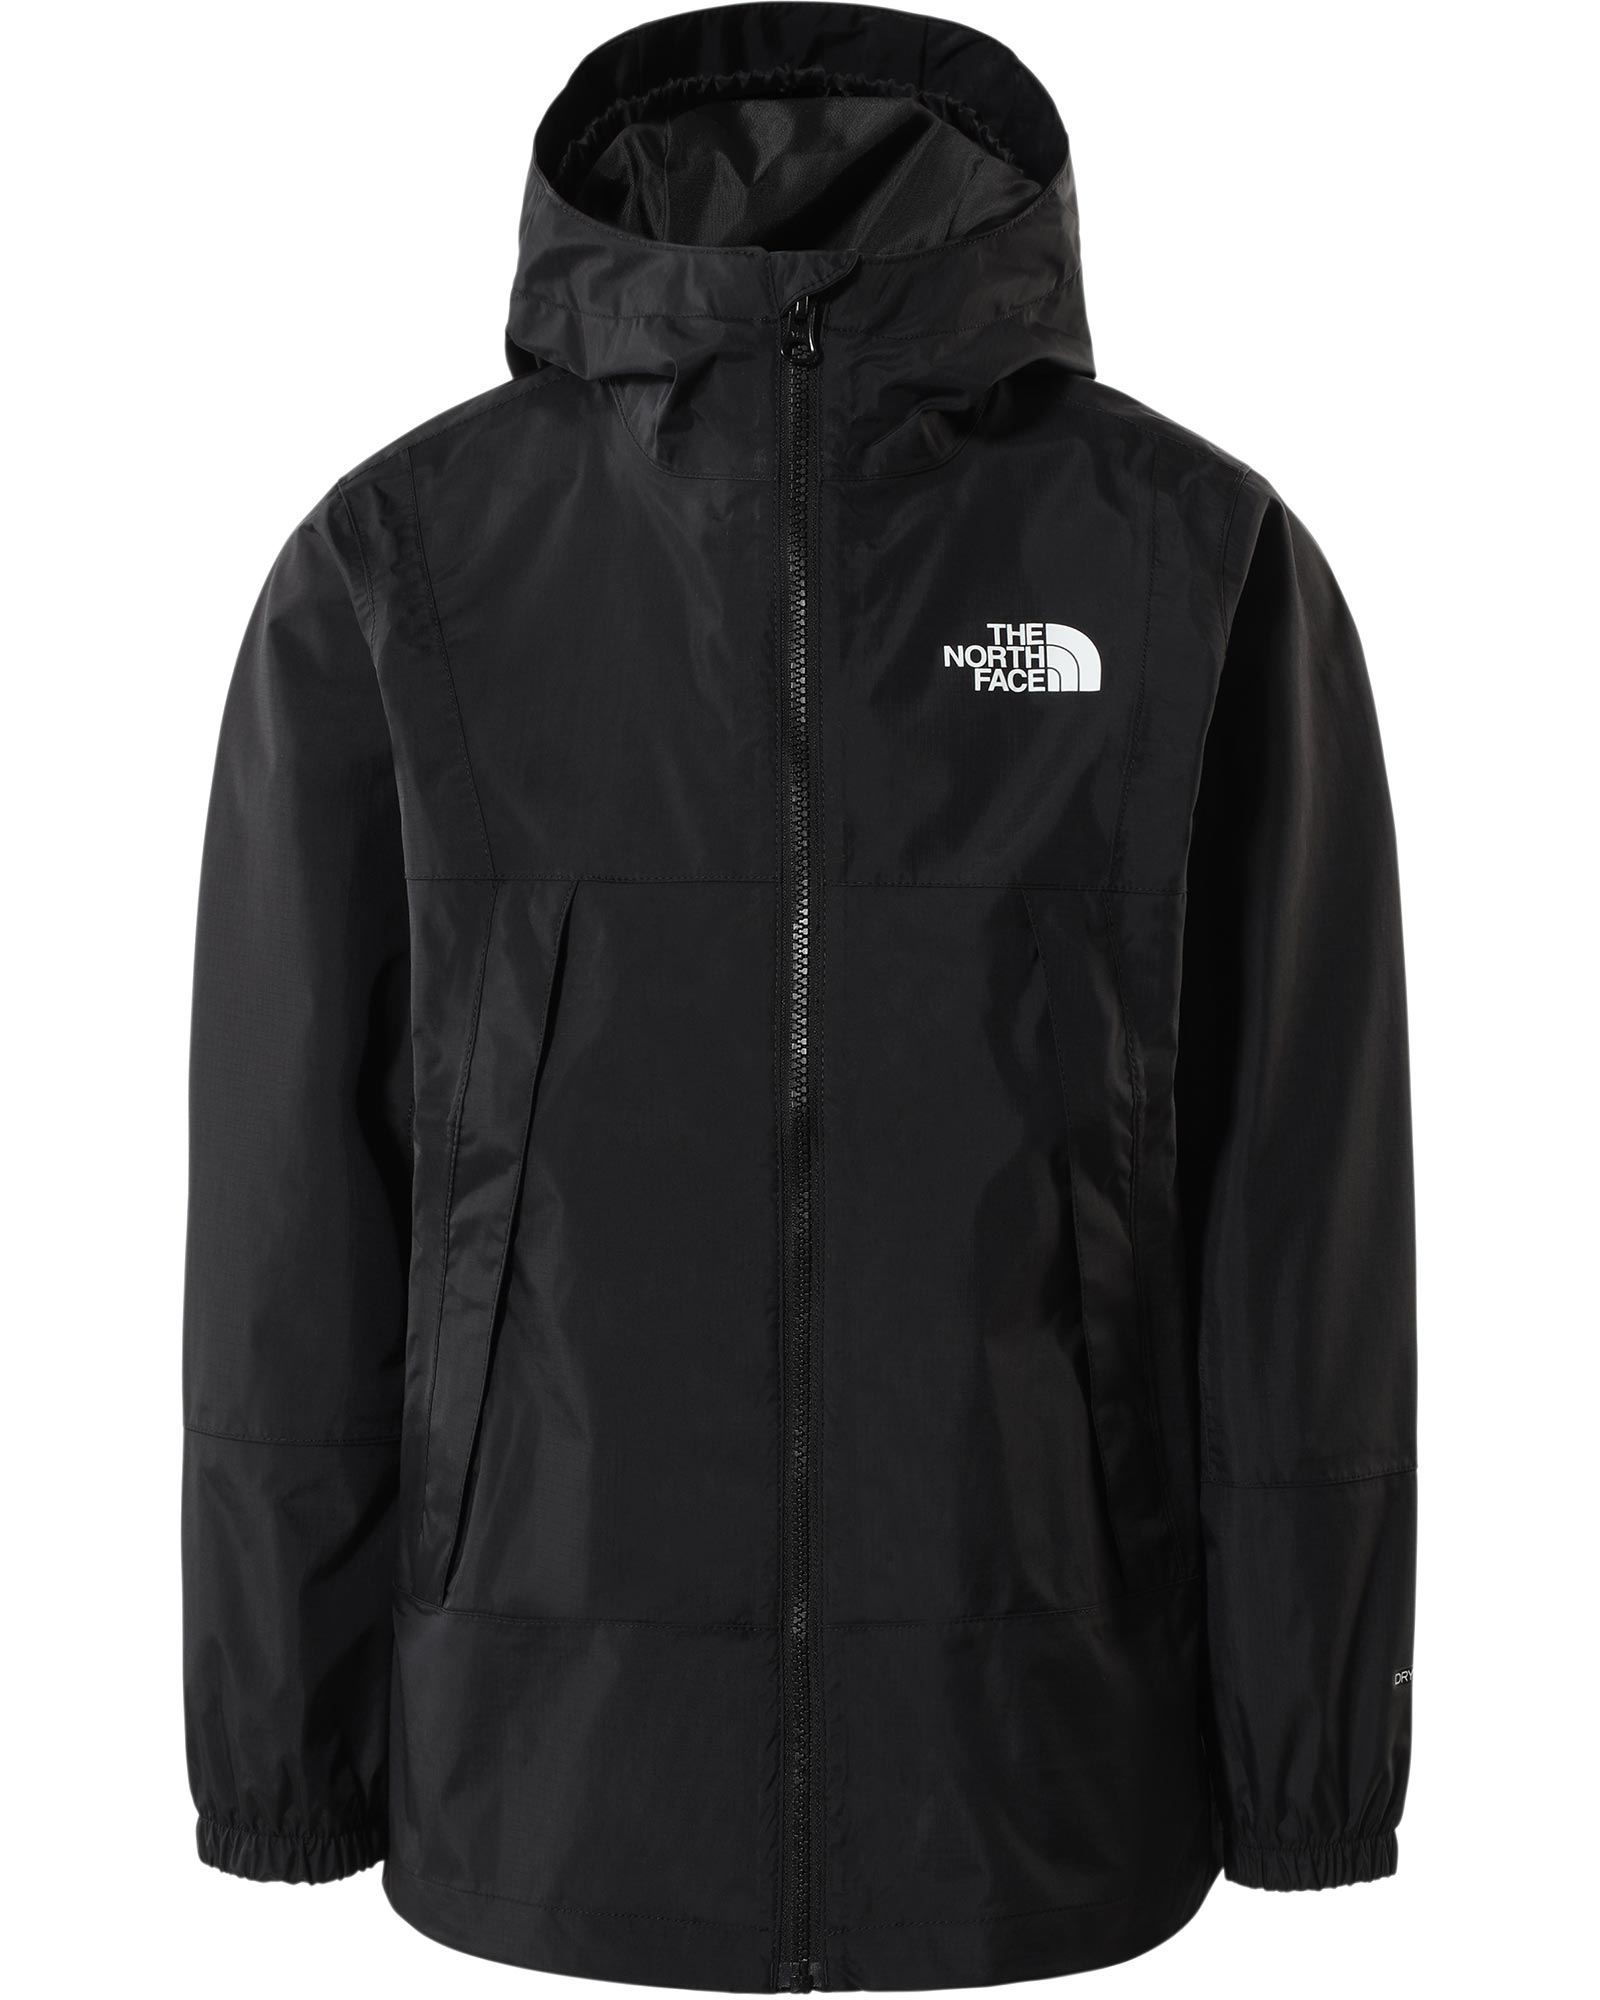 The North Face Youth Lobuche DryVent Jacket - TNF Black M